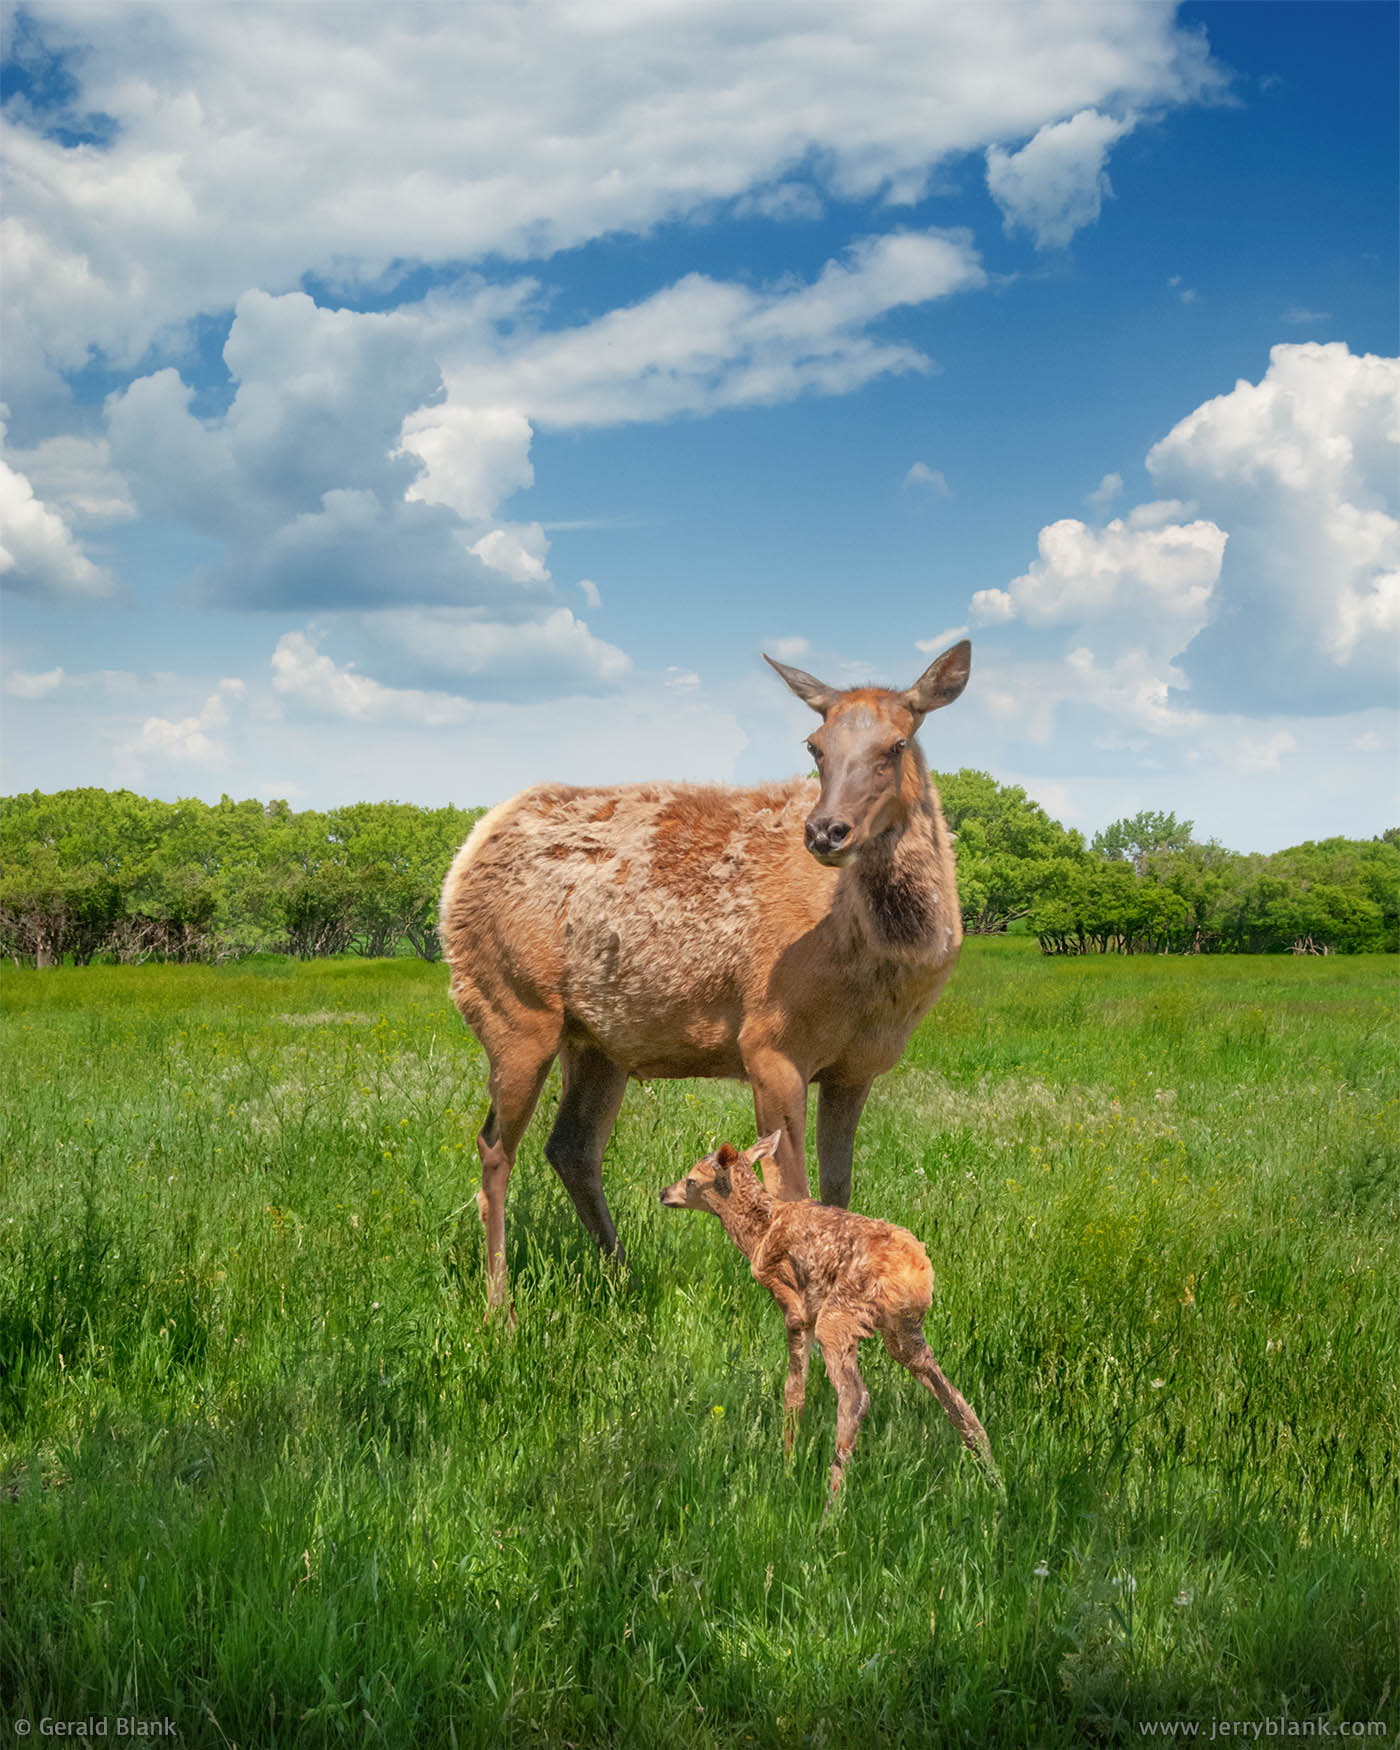 #00160 - A newborn elk calf with its mother, on the west side of the Killdeer Mountains in Dunn County, North Dakota - photo by Jerry Blank